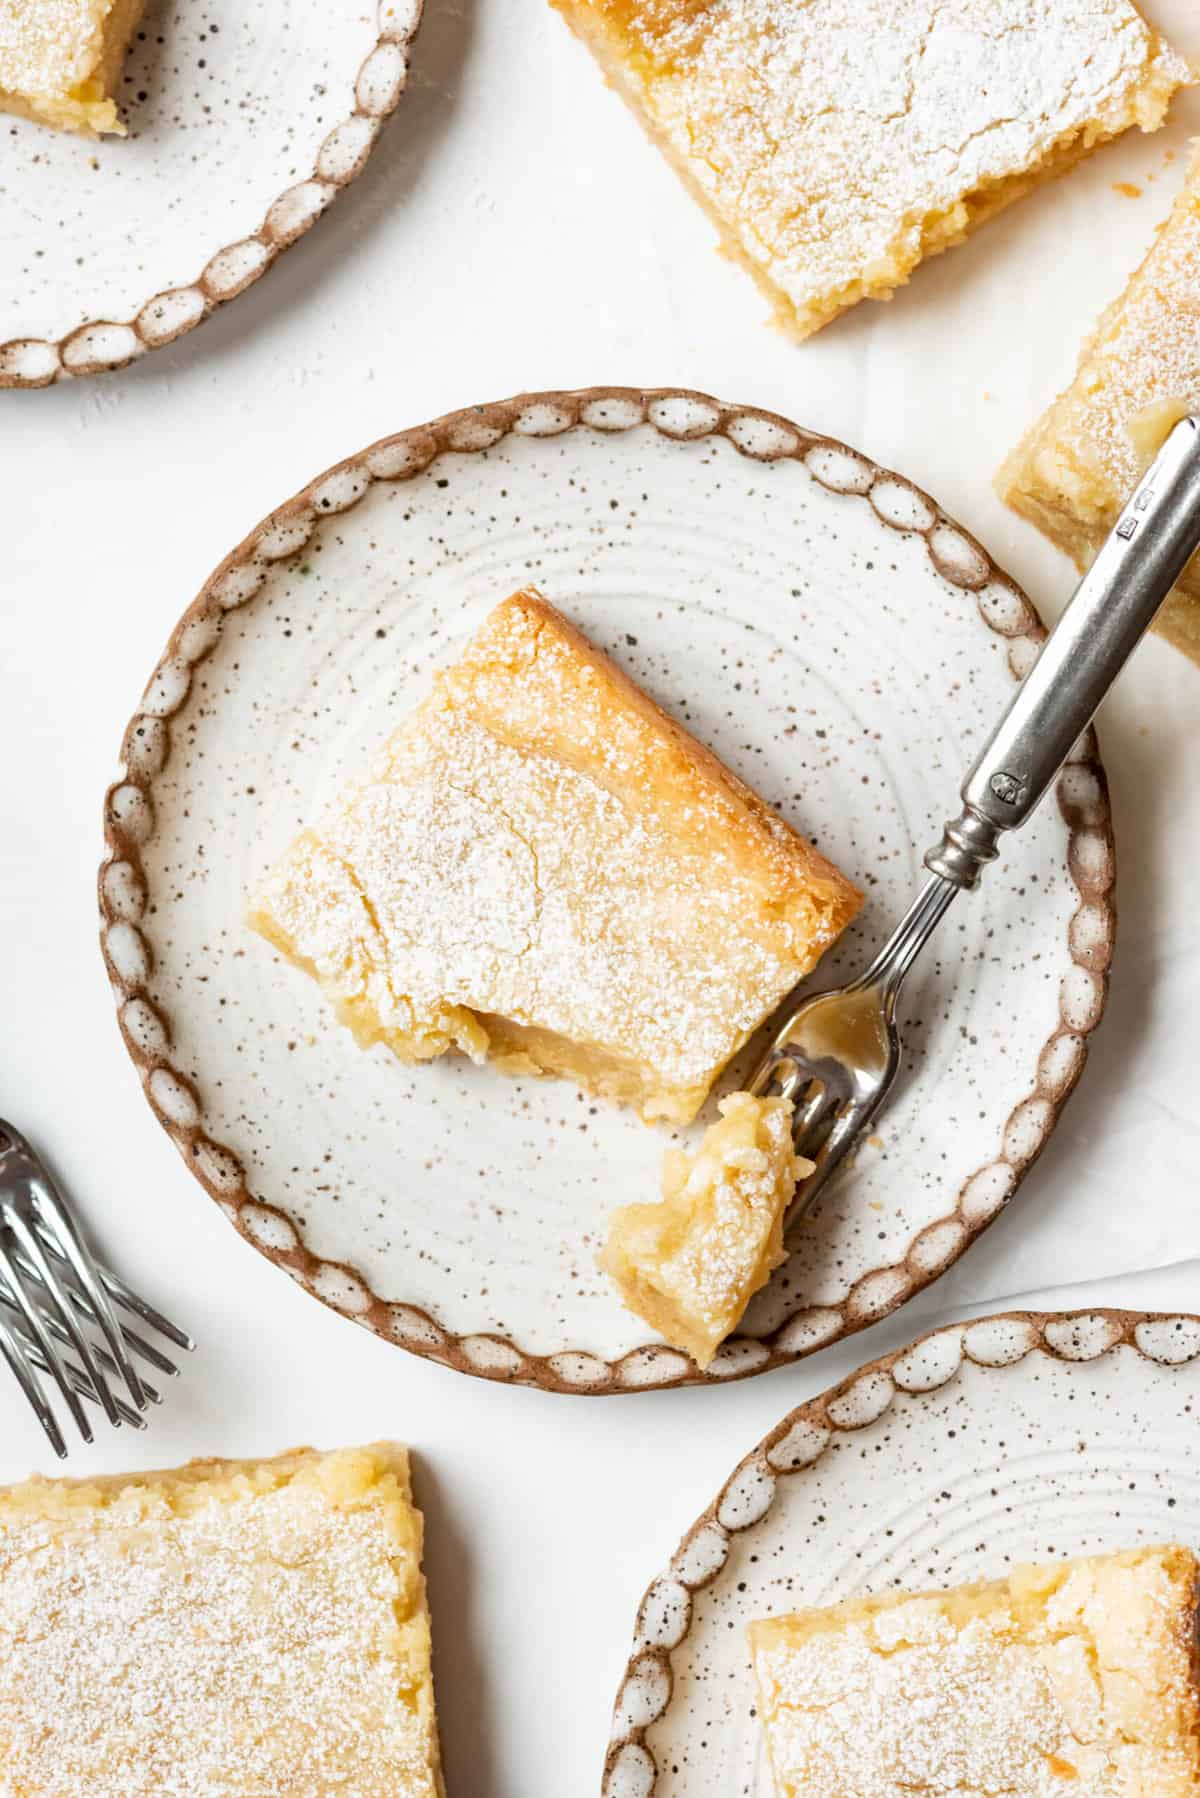 An overhead angle of a piece of gooey butter cake with one bite taken out of it on a plate.